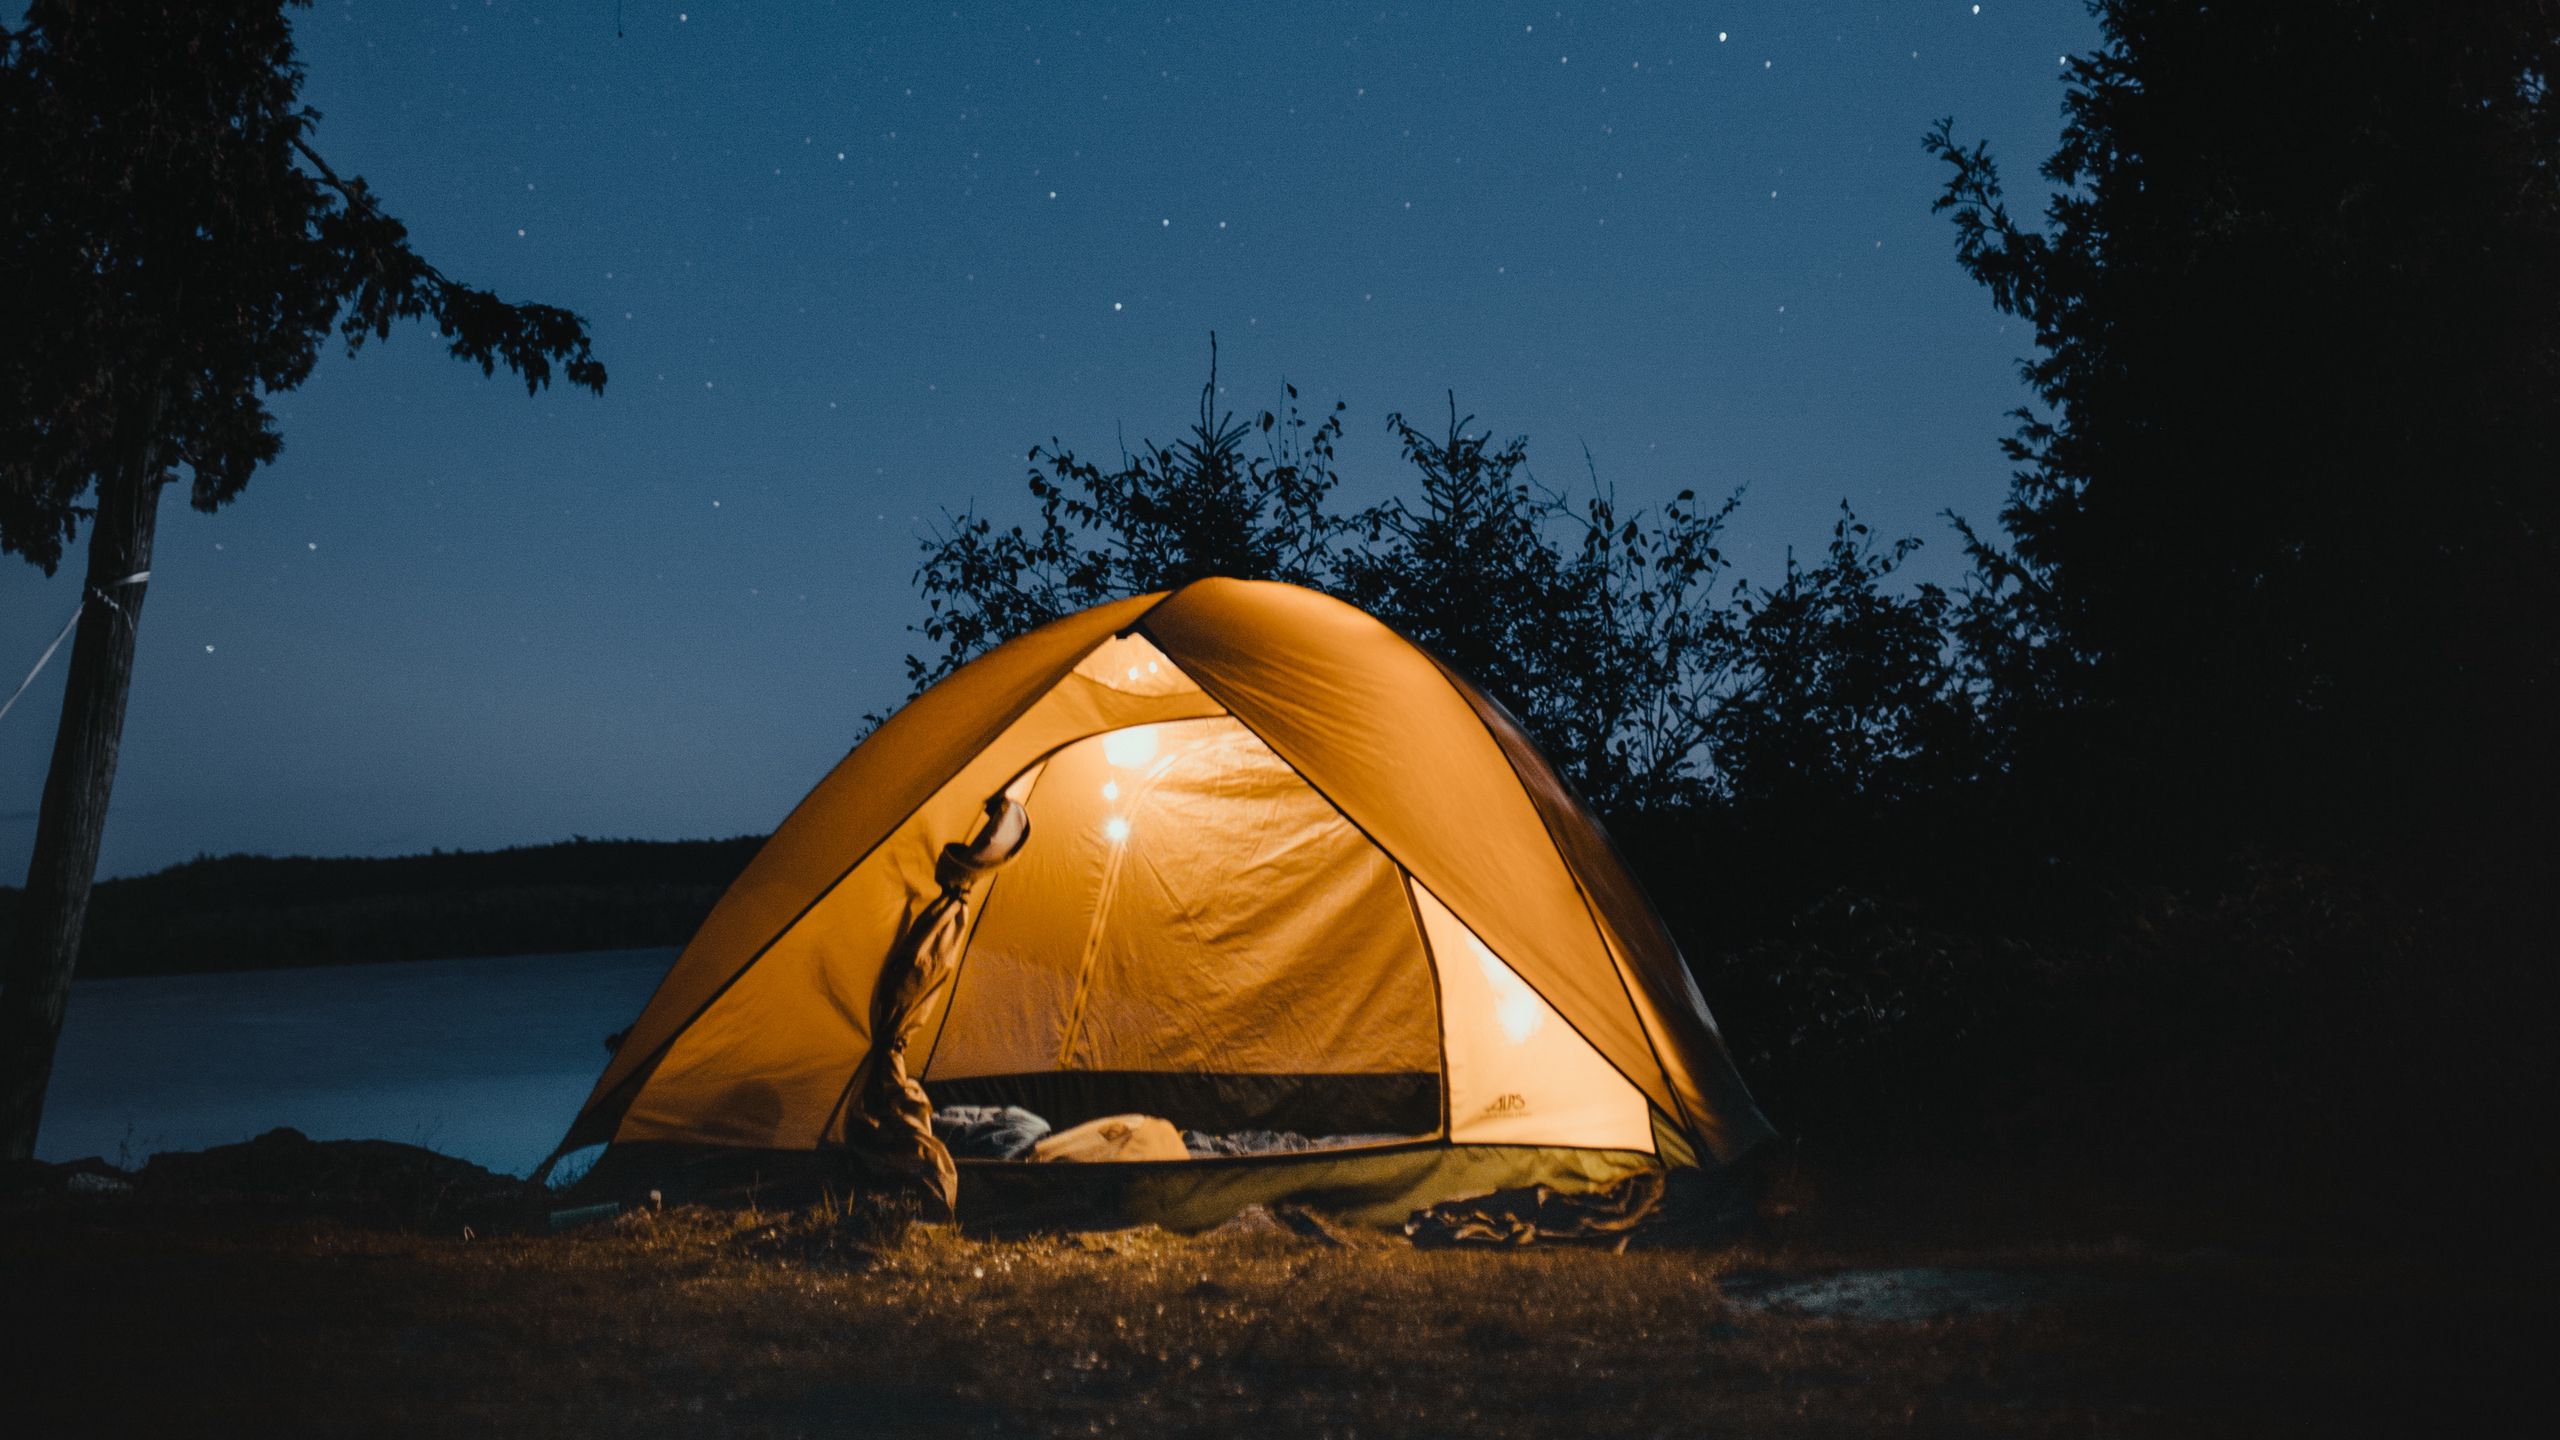 Download wallpaper 2560x1440 tent, night, camping, starry sky, travel widescreen 16:9 HD background